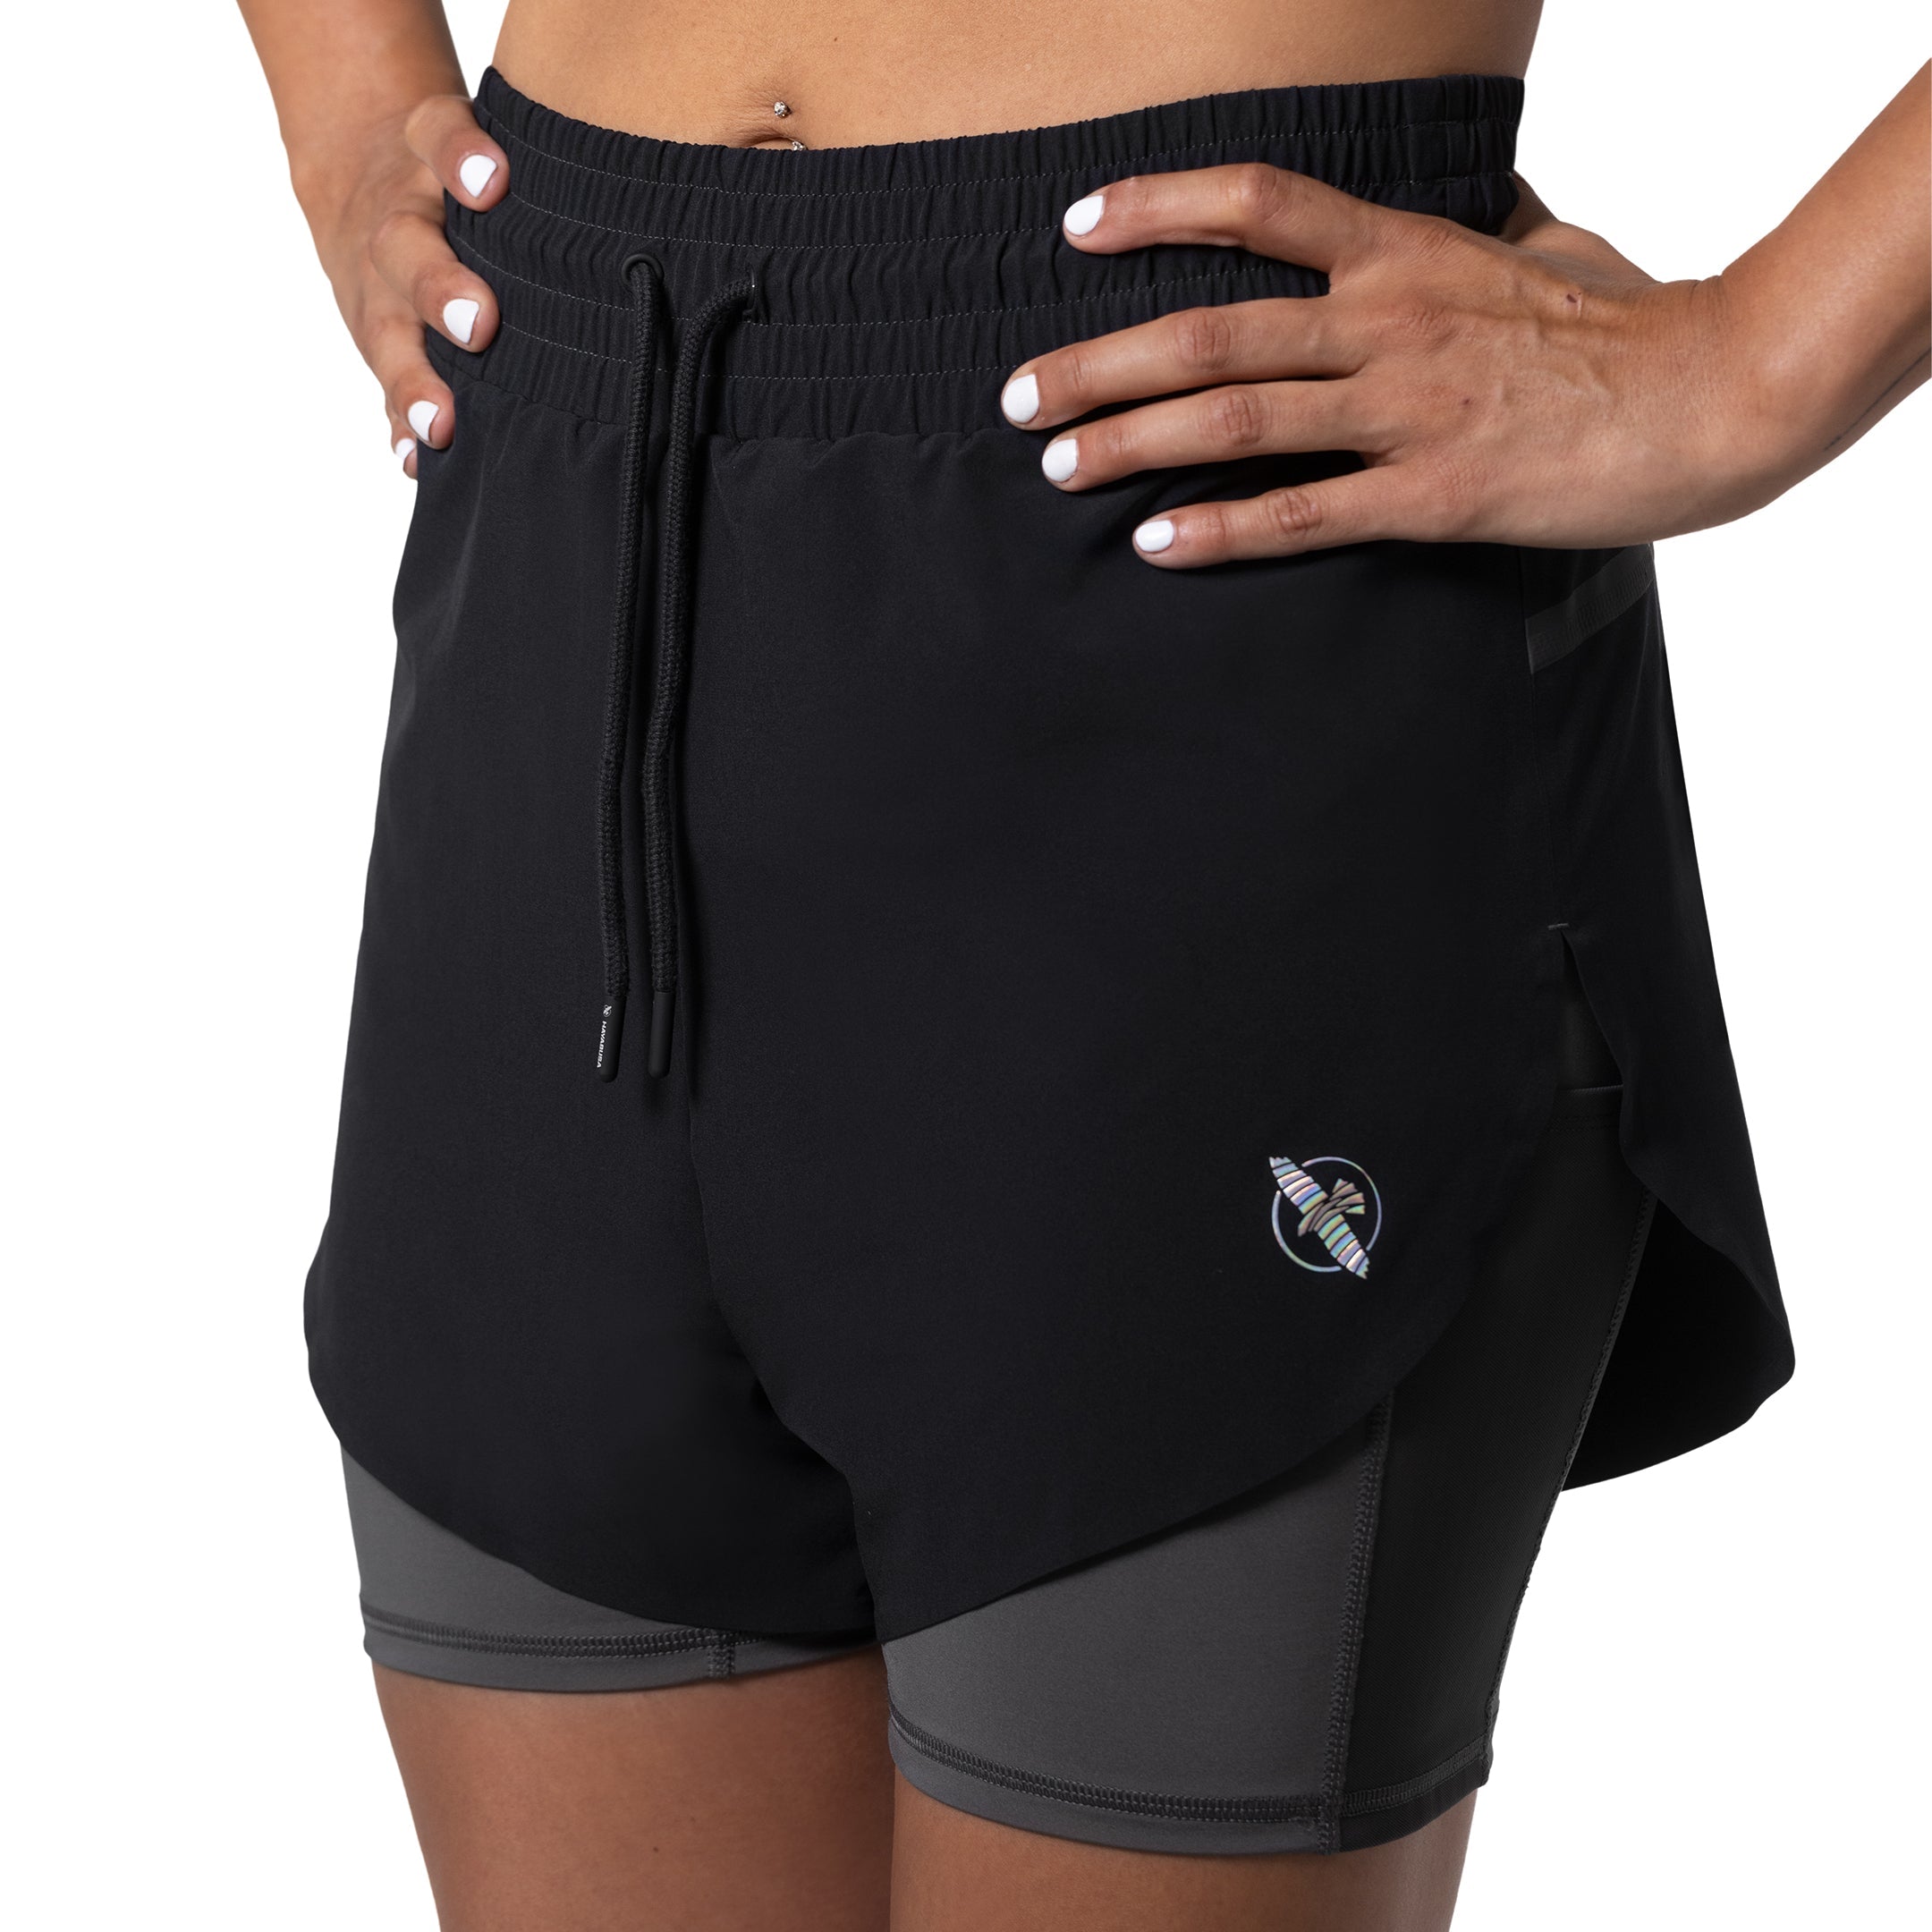 Quilted Active Shorts  Women's Athletic Shorts • Hayabusa